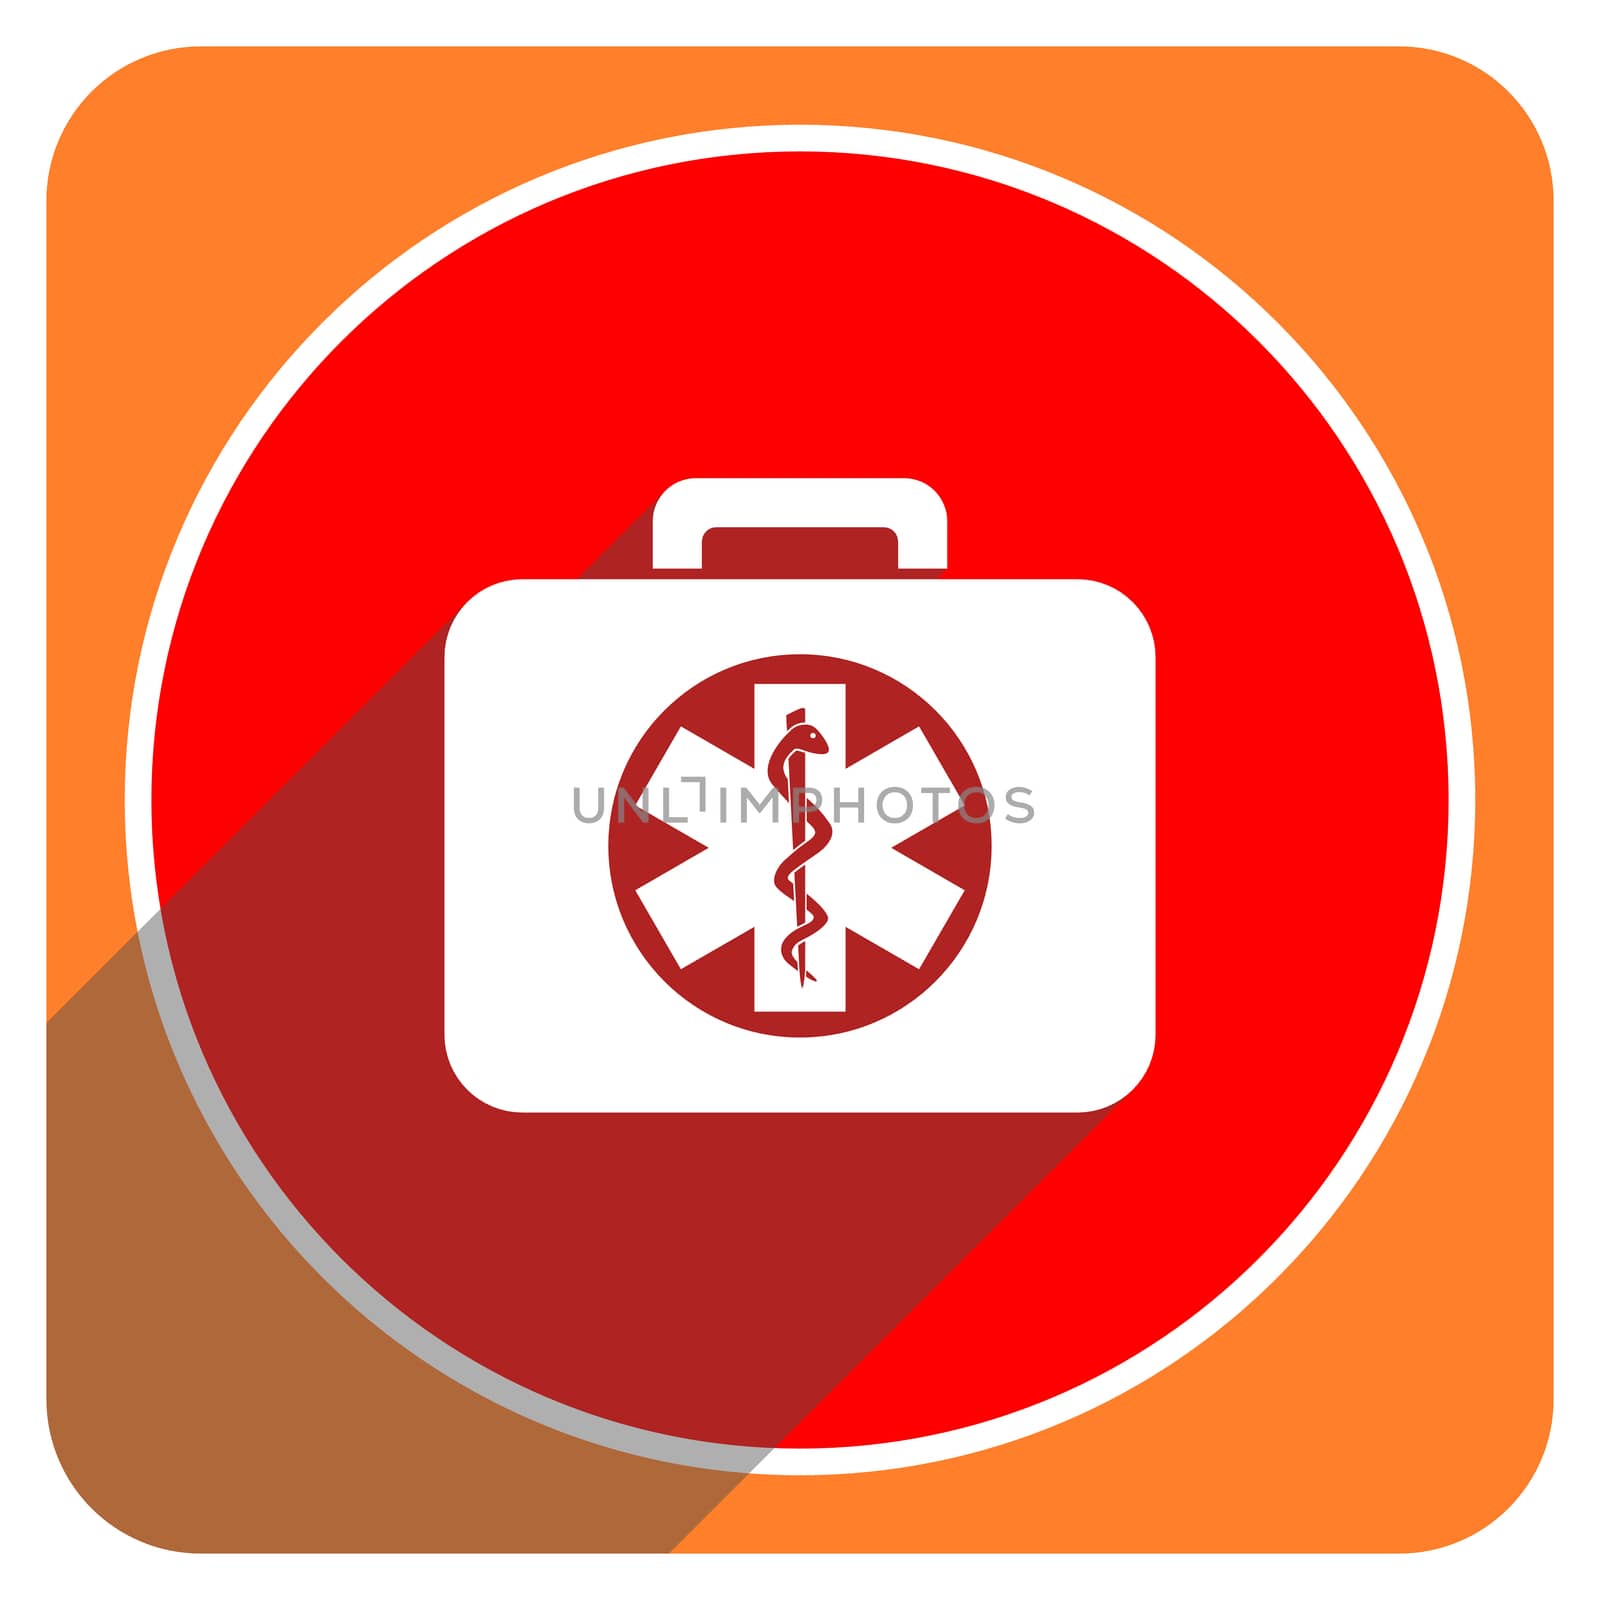 rescue kit red flat icon isolated